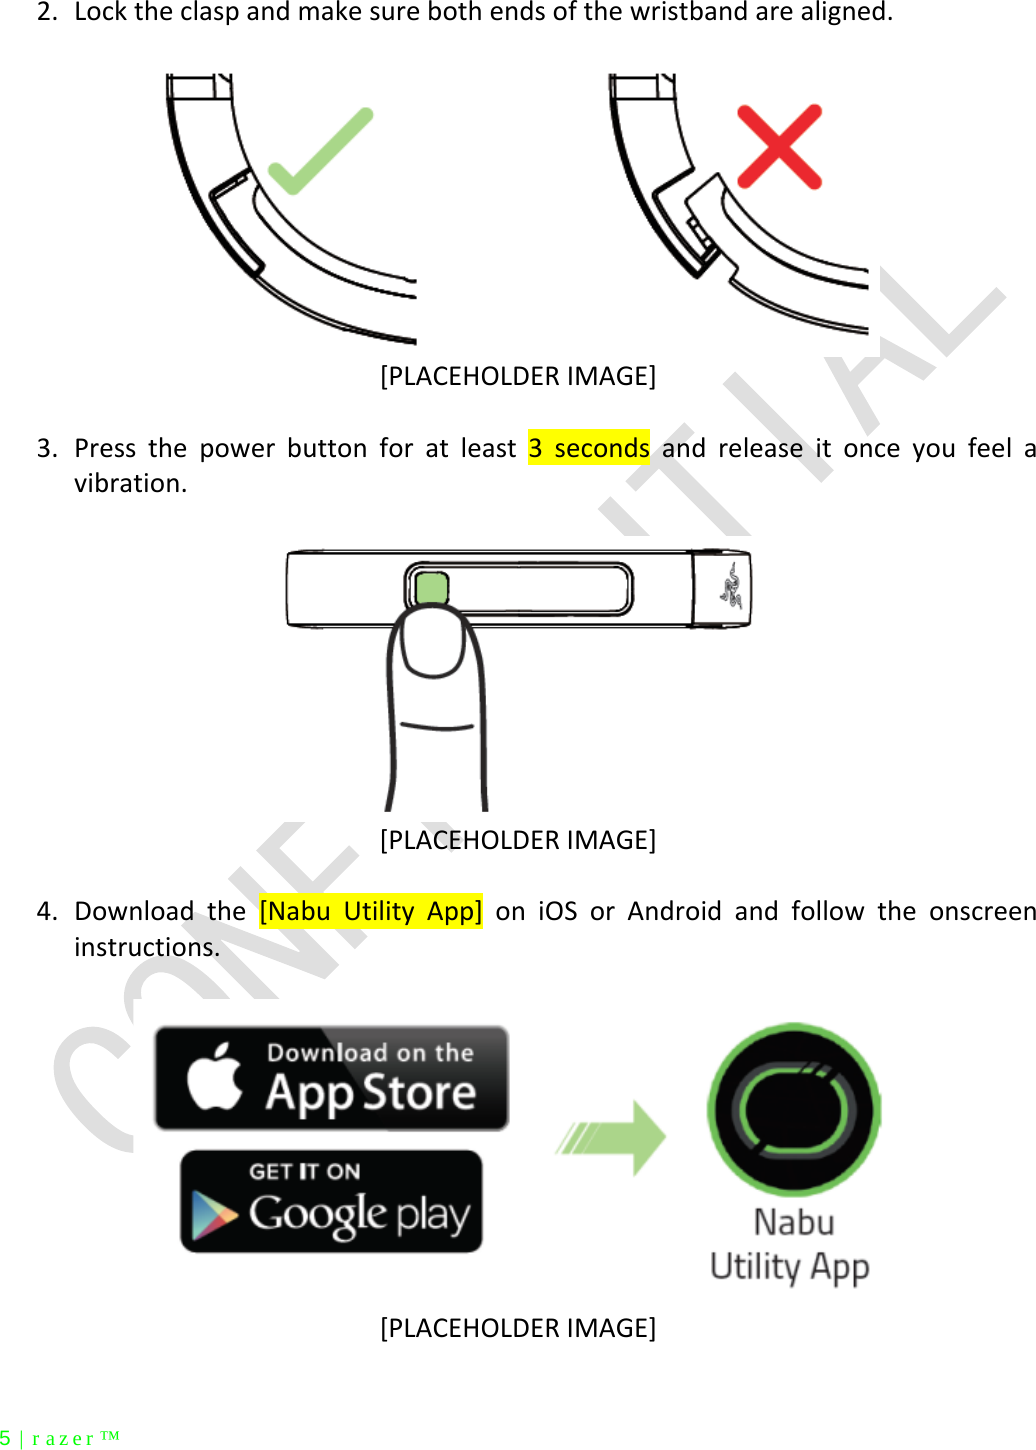  5 | razer™ 2. Lock the clasp and make sure both ends of the wristband are aligned.   [PLACEHOLDER IMAGE]  3. Press the power button for at least 3  seconds  and release it once you feel a vibration.   [PLACEHOLDER IMAGE]  4. Download the [Nabu Utility  App]  on iOS or Android and follow the onscreen instructions.   [PLACEHOLDER IMAGE]  